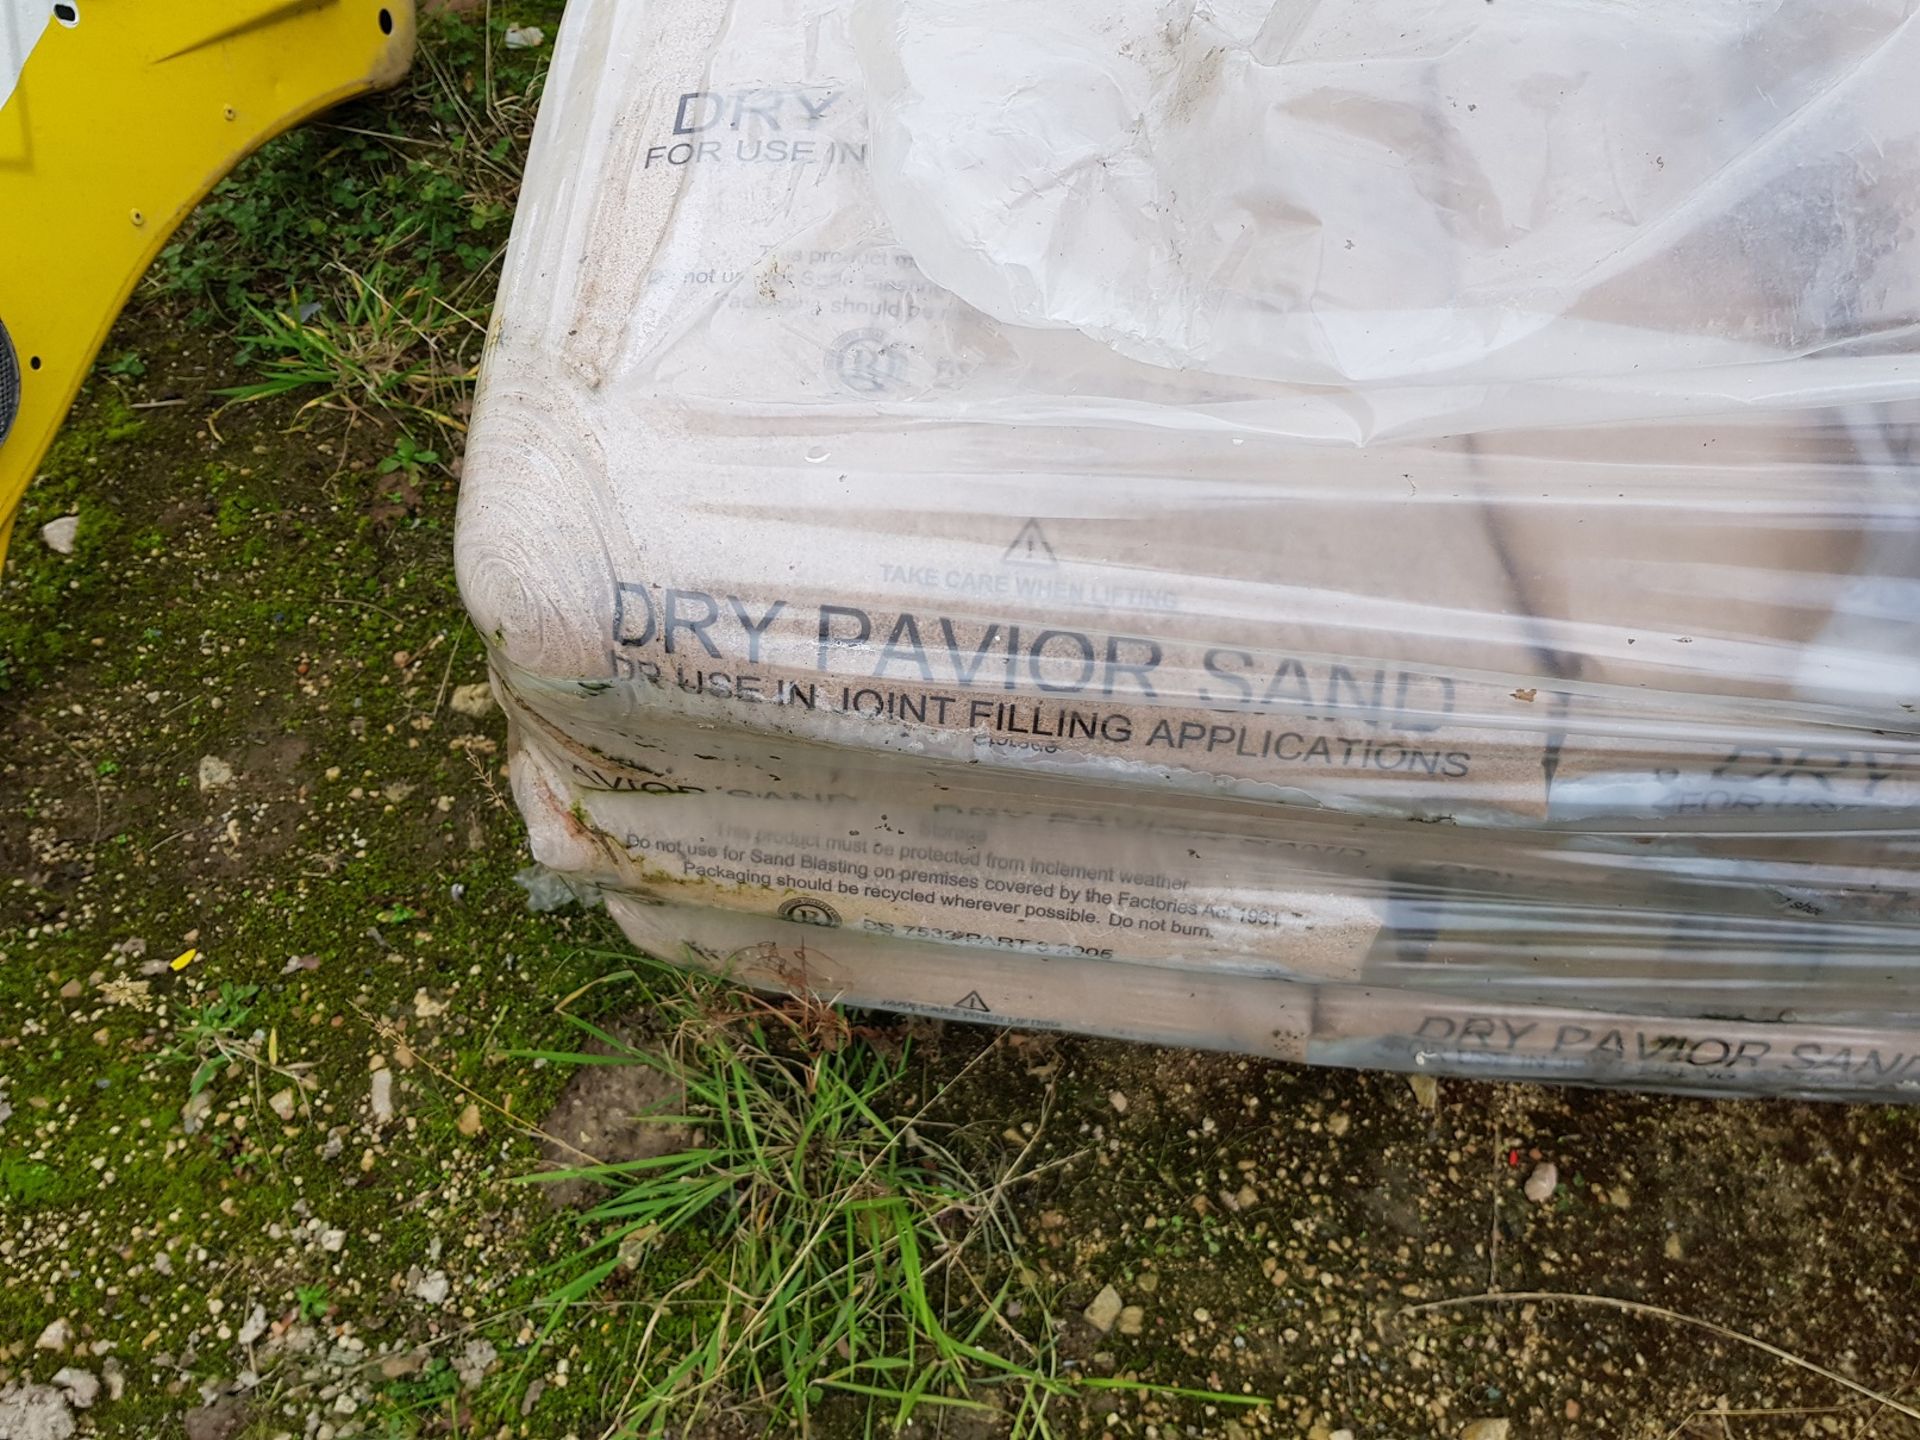 APPROX 30 BAGS OF KILN DRY PAVIOR SAND - Image 2 of 2